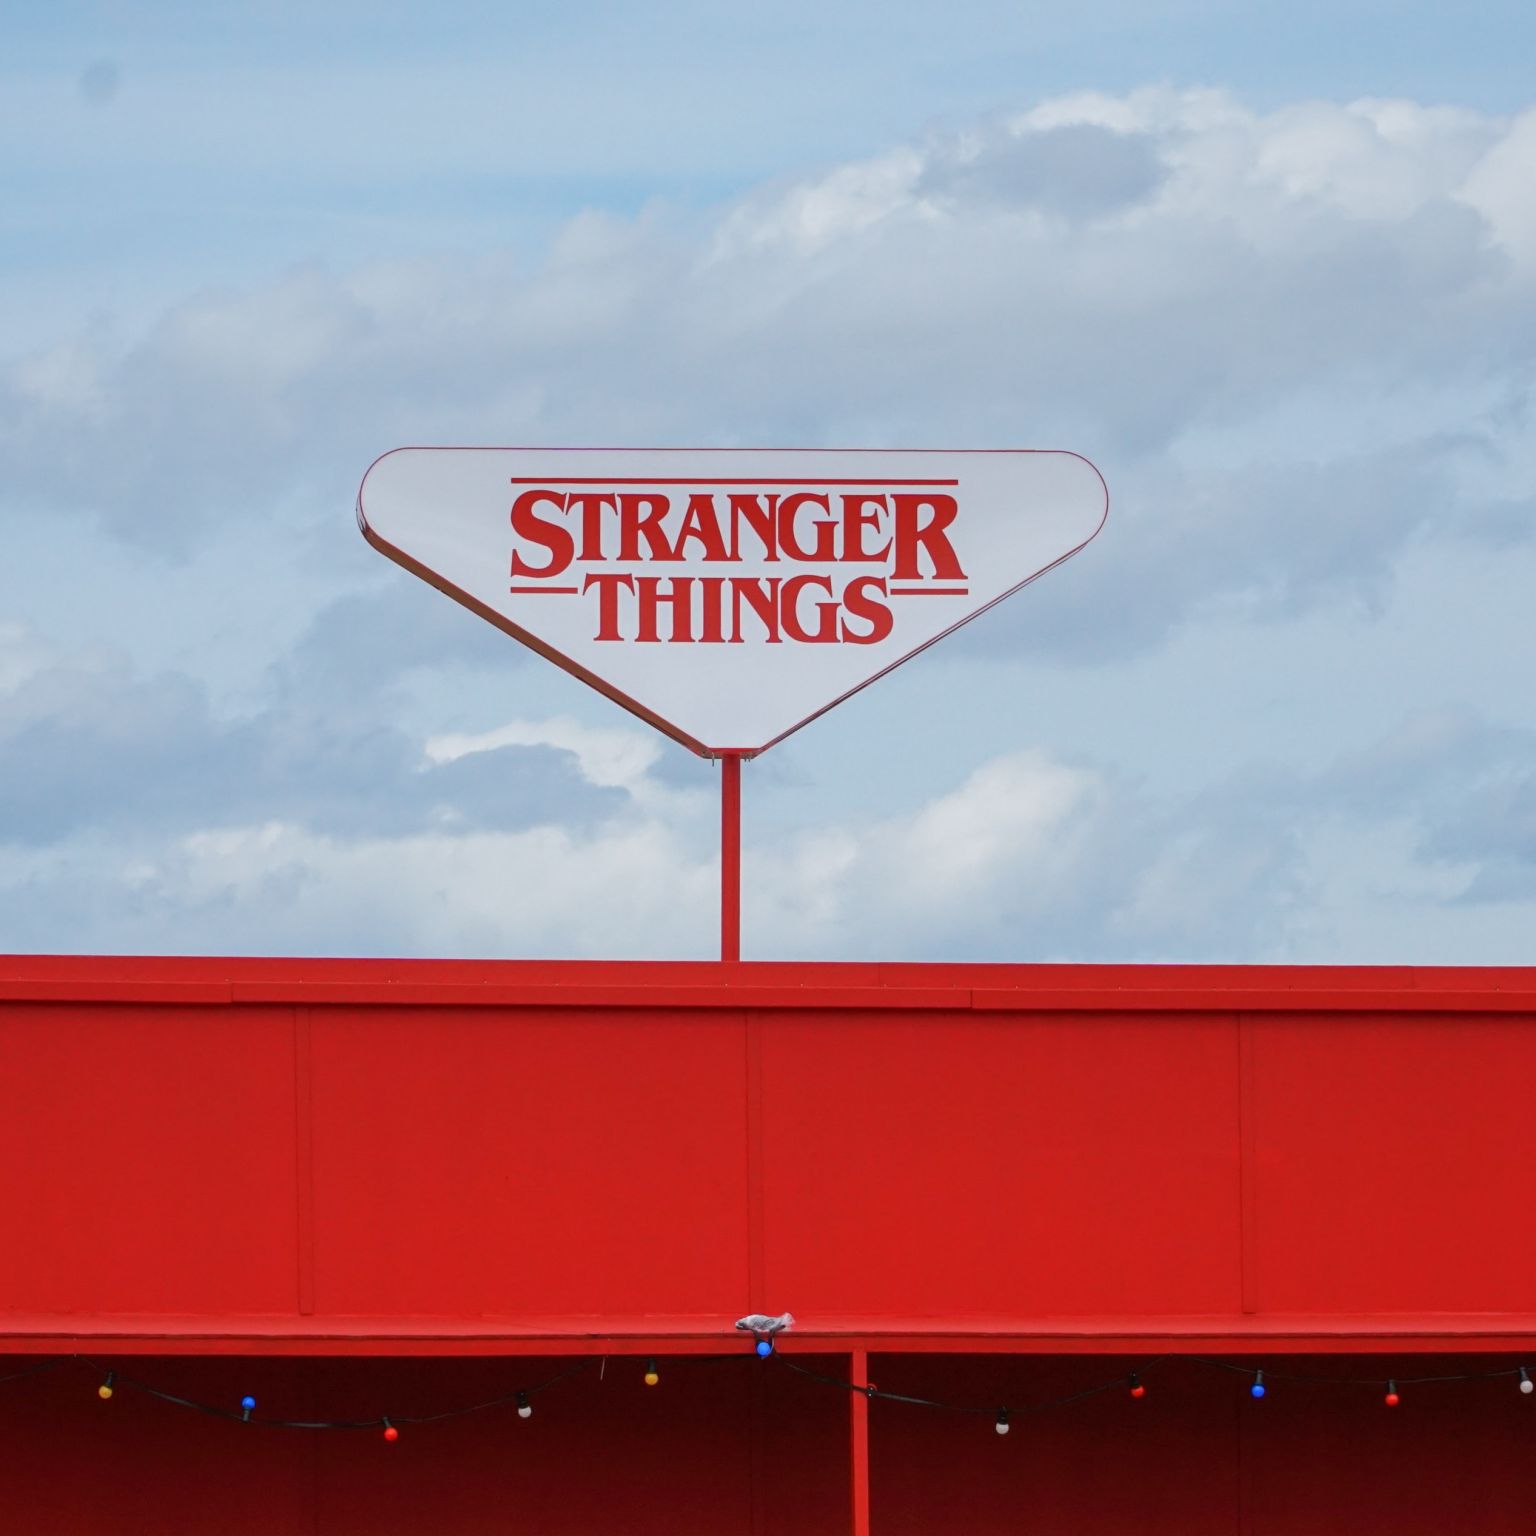 A triangular Stranger Things sign above a red building. There are clouds in the background behind the building.